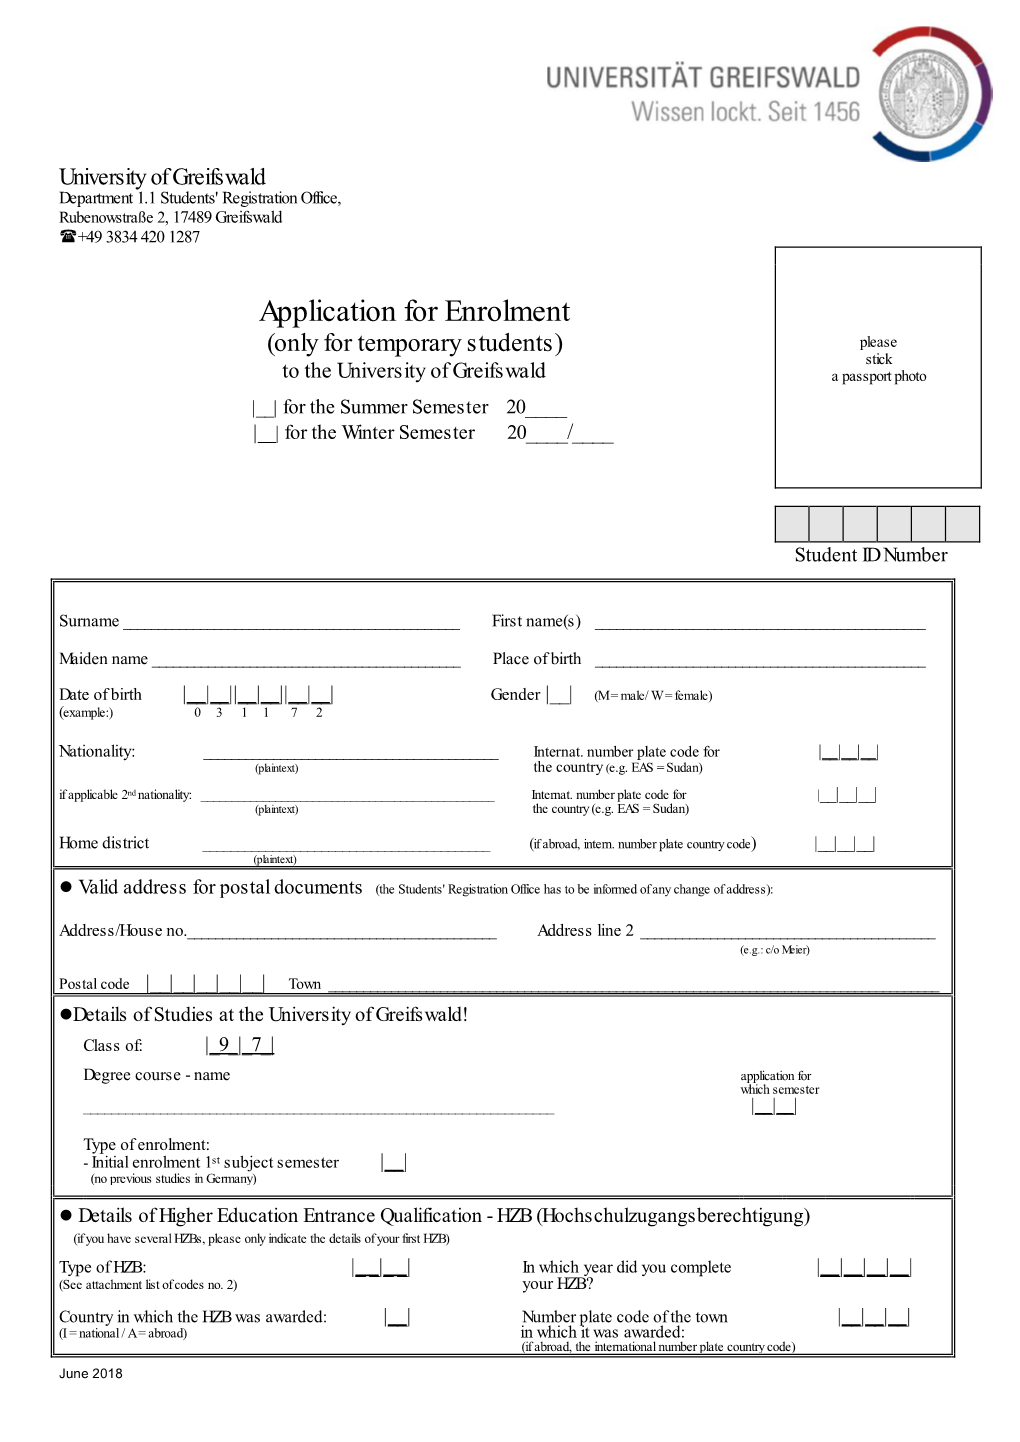 Application for Enrolment (Temporary Students)